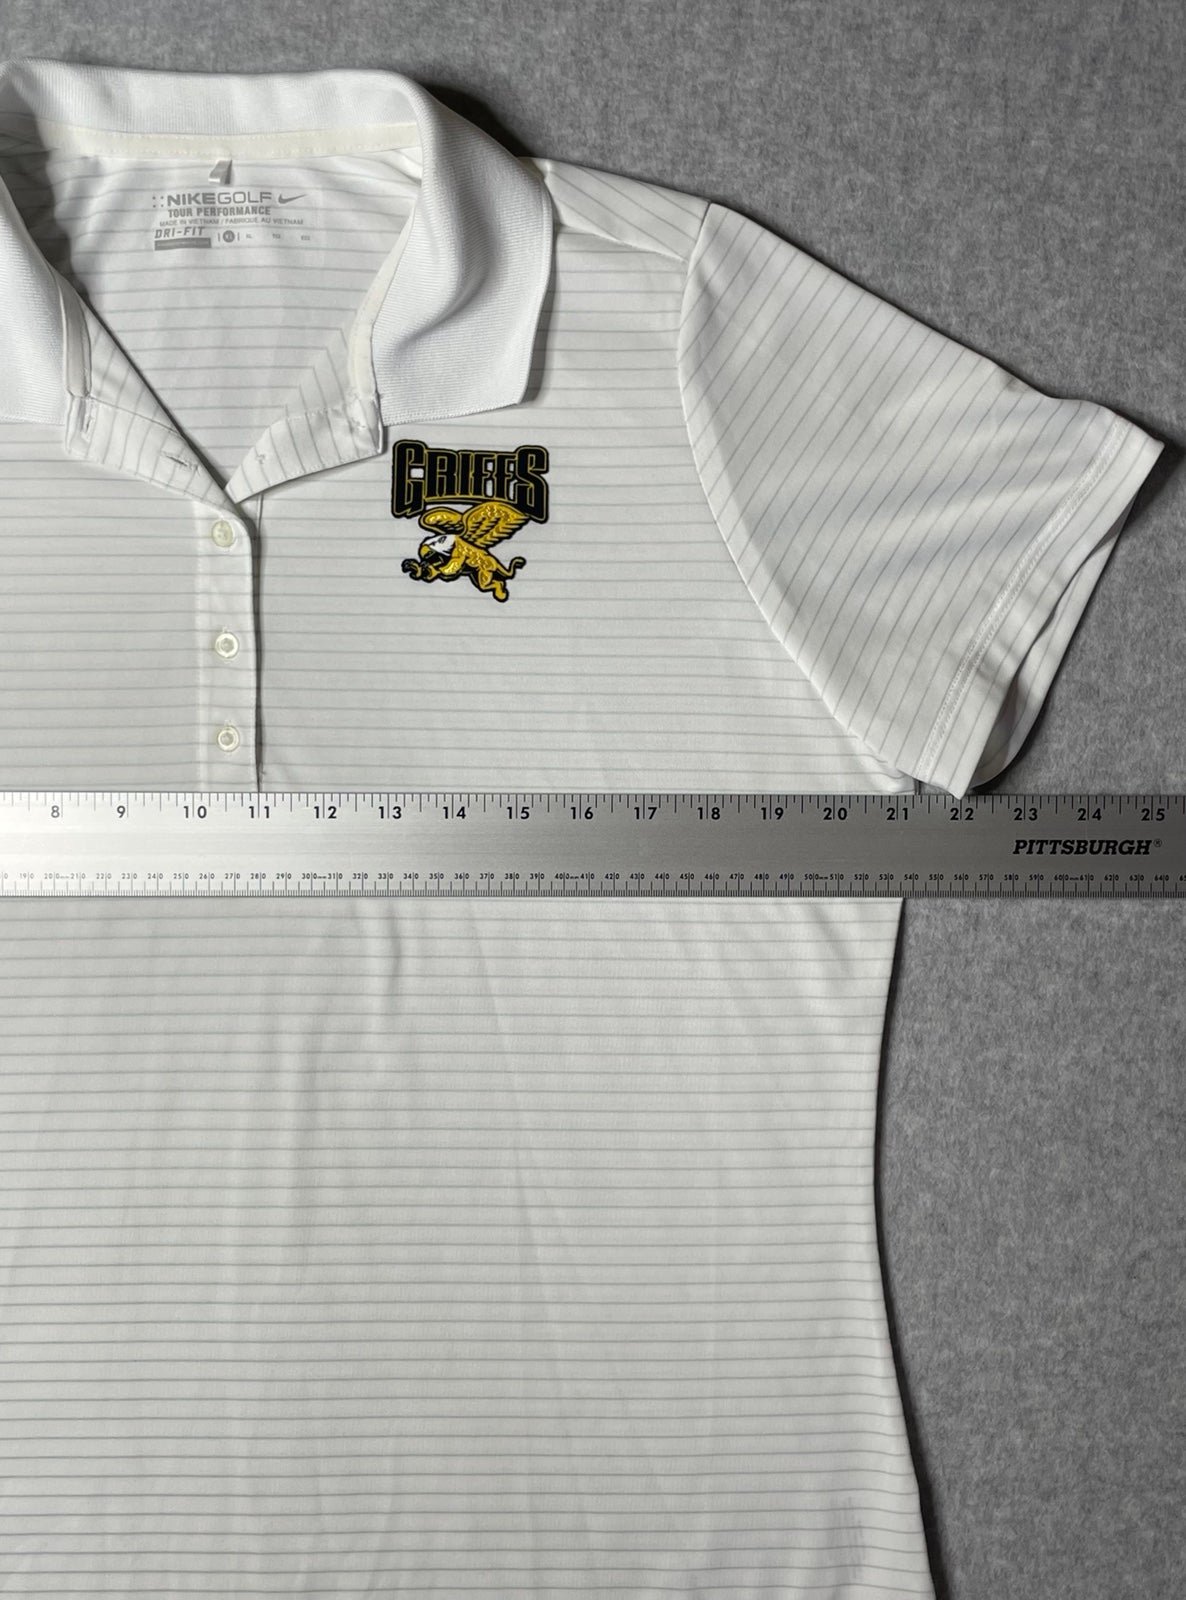 Buy Nike Golf Shirt Womens Canisius High School Polo l27FH06Zh Factory Price